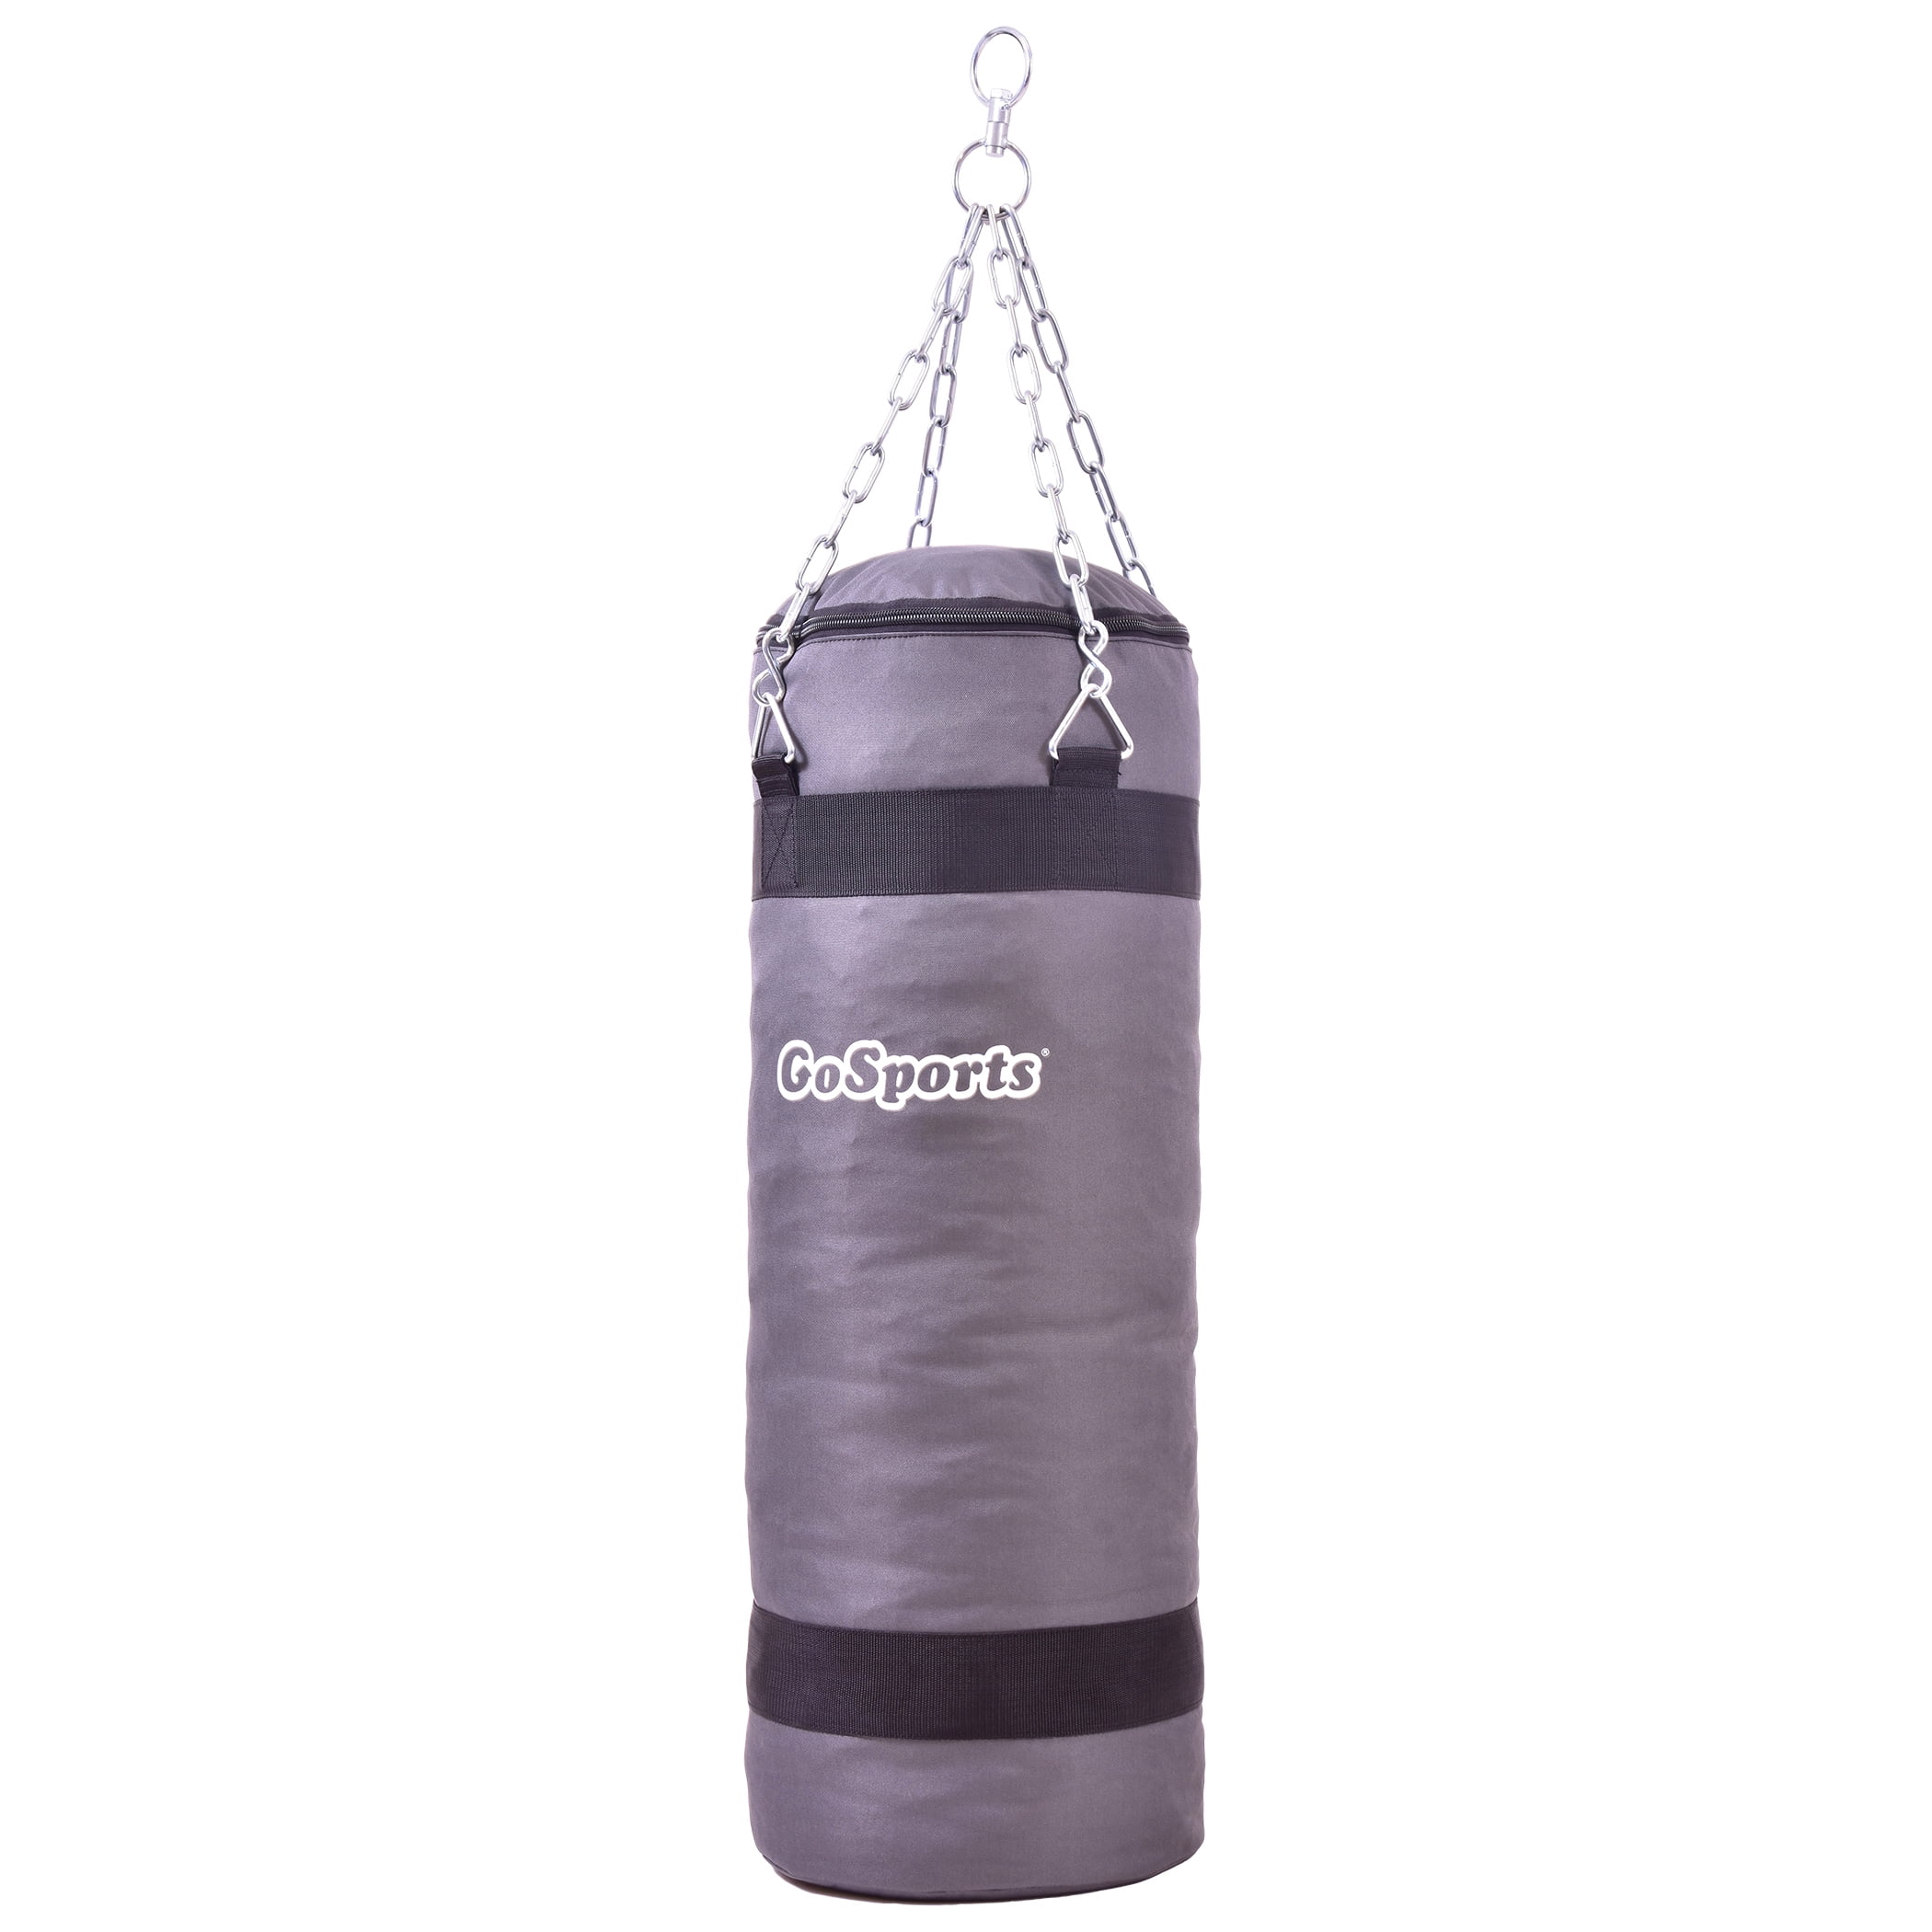 Sold Un-Filled BLUE karate martial arts kung fu Boxing Training Punch Bag 3ft 